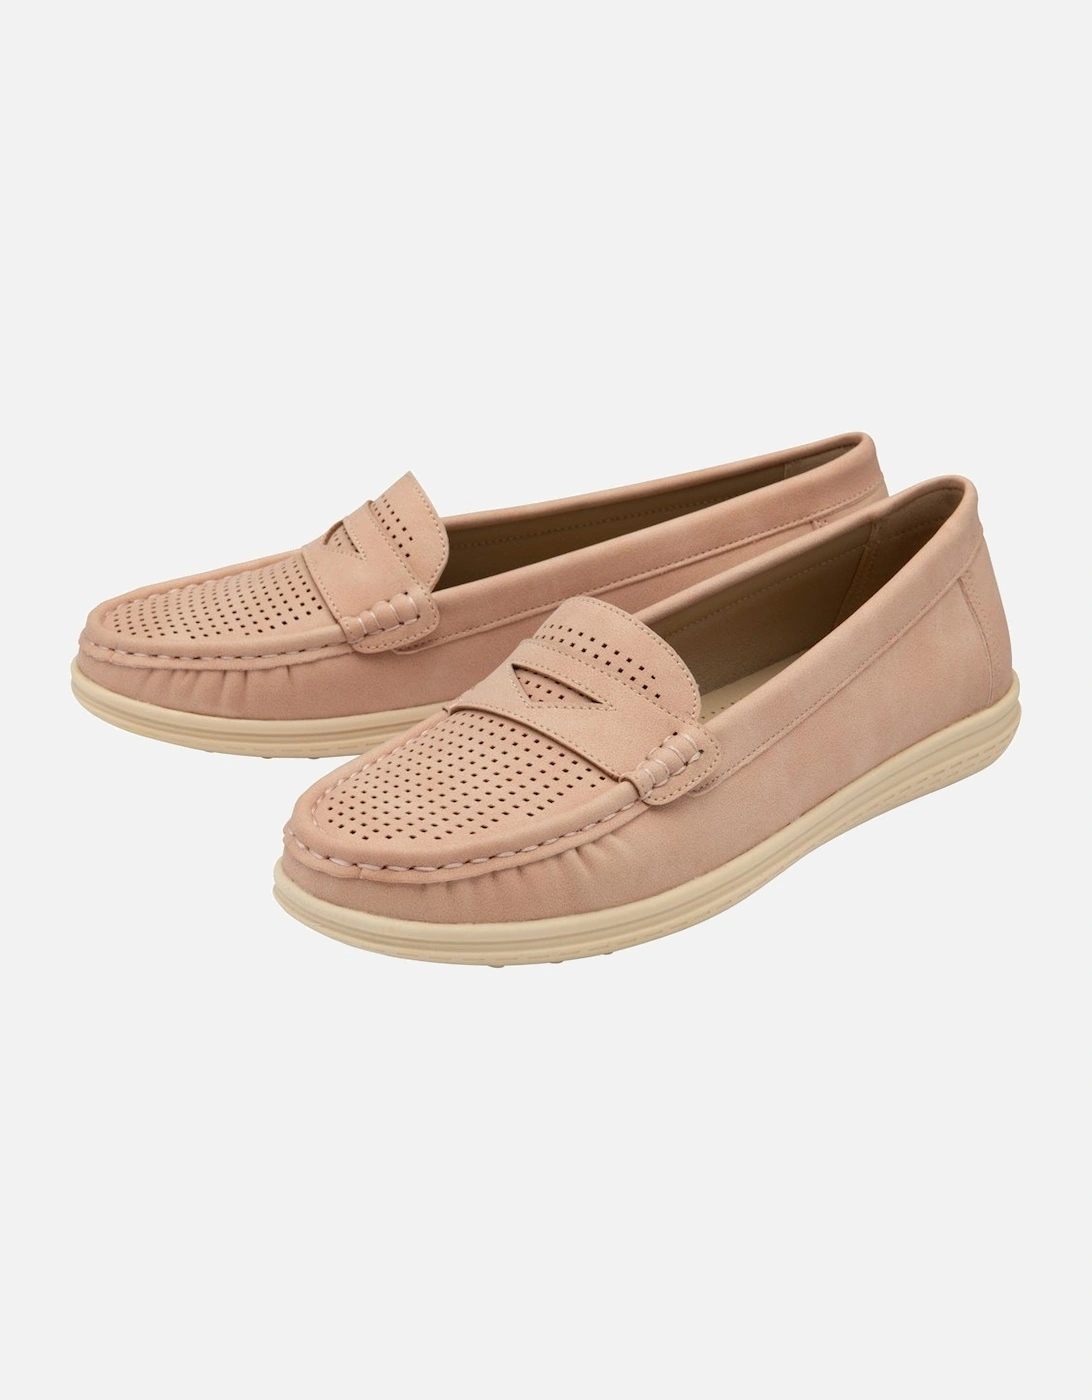 Cernoia Womens Loafers